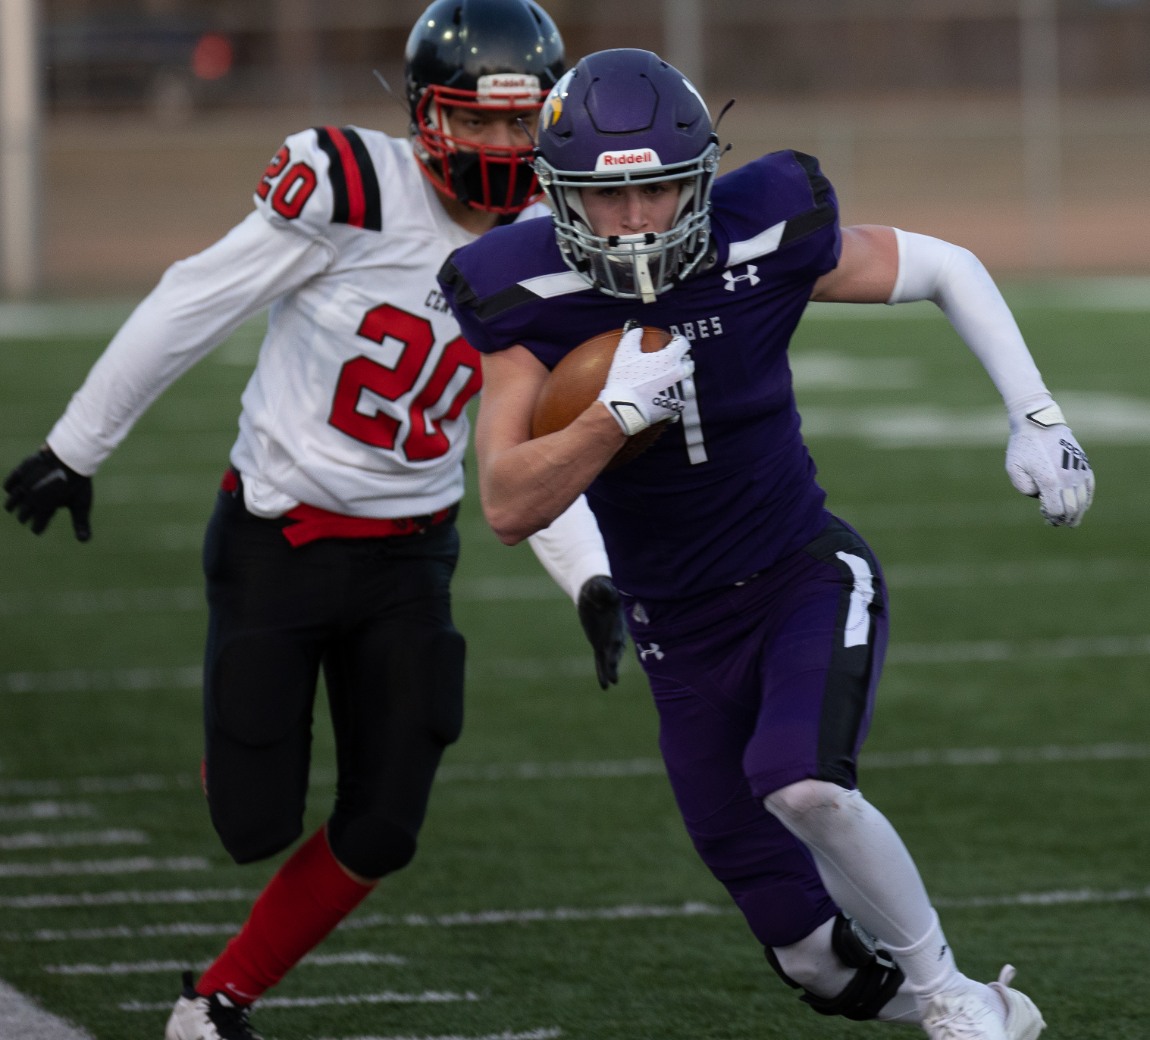 Eau-Claire-Memorial-JV-Football-LaCrosse-Central-at-Home-3-29-21-1608